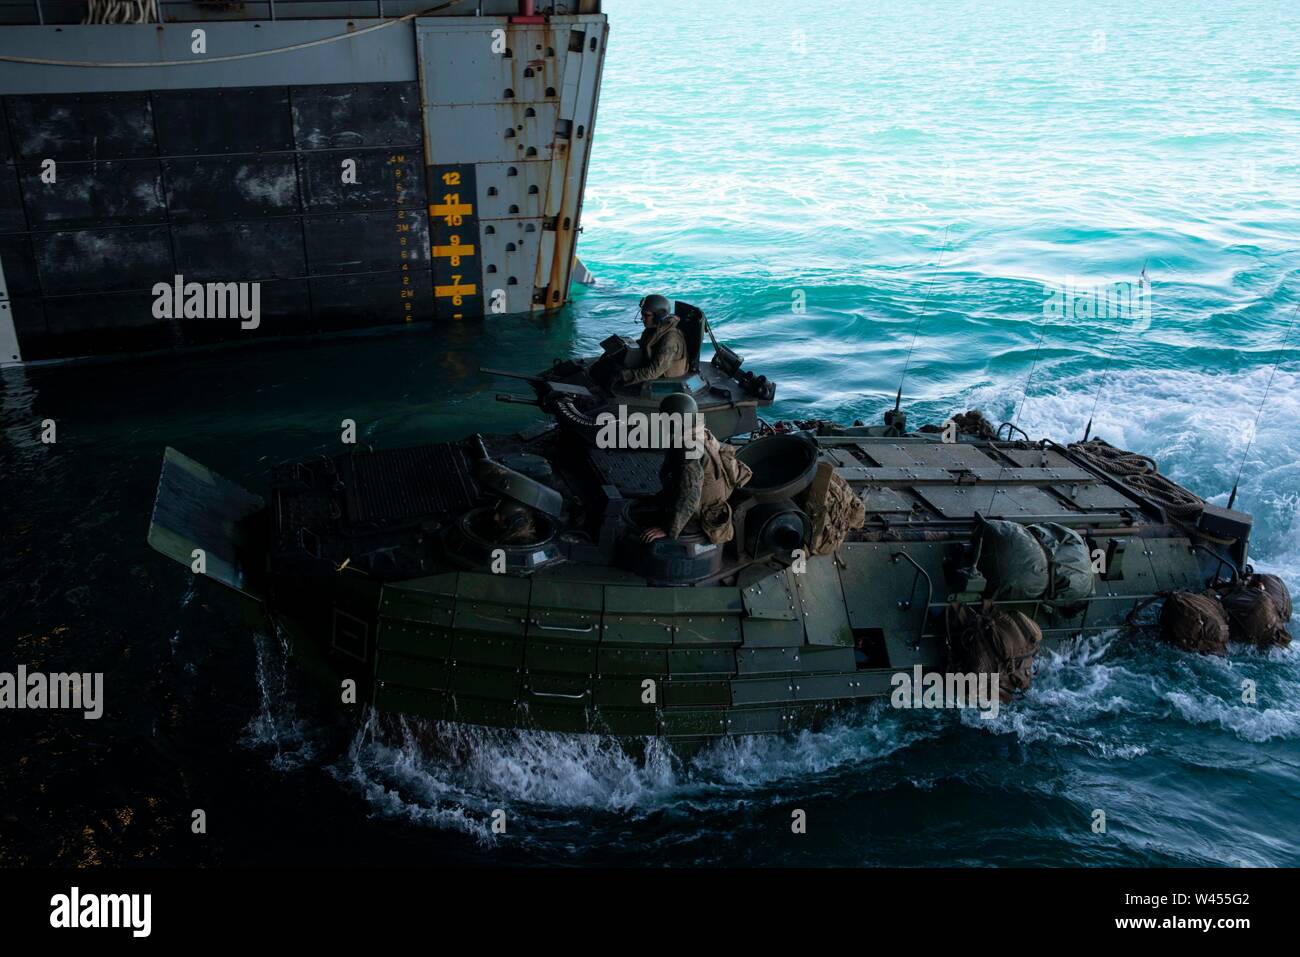 190718-N-DX072-1169 STANAGE BAY, Australia (July 18, 2019) An assault amphibious vehicle (AAV), assigned to the 31st Marine Expeditionary Unit (MEU), enters the well deck of the amphibious transport dock ship USS Green Bay (LPD 20). Green Bay, part of the Wasp Expeditionary Strike Group, with embarked 31st MEU, is currently participating in Talisman Sabre 2019 off the coast of Northern Australia. A bilateral, biennial event, Talisman Sabre is designed to improve U.S. and Australian combat training, readiness and interoperability through realistic, relevant training necessary to maintain region Stock Photo